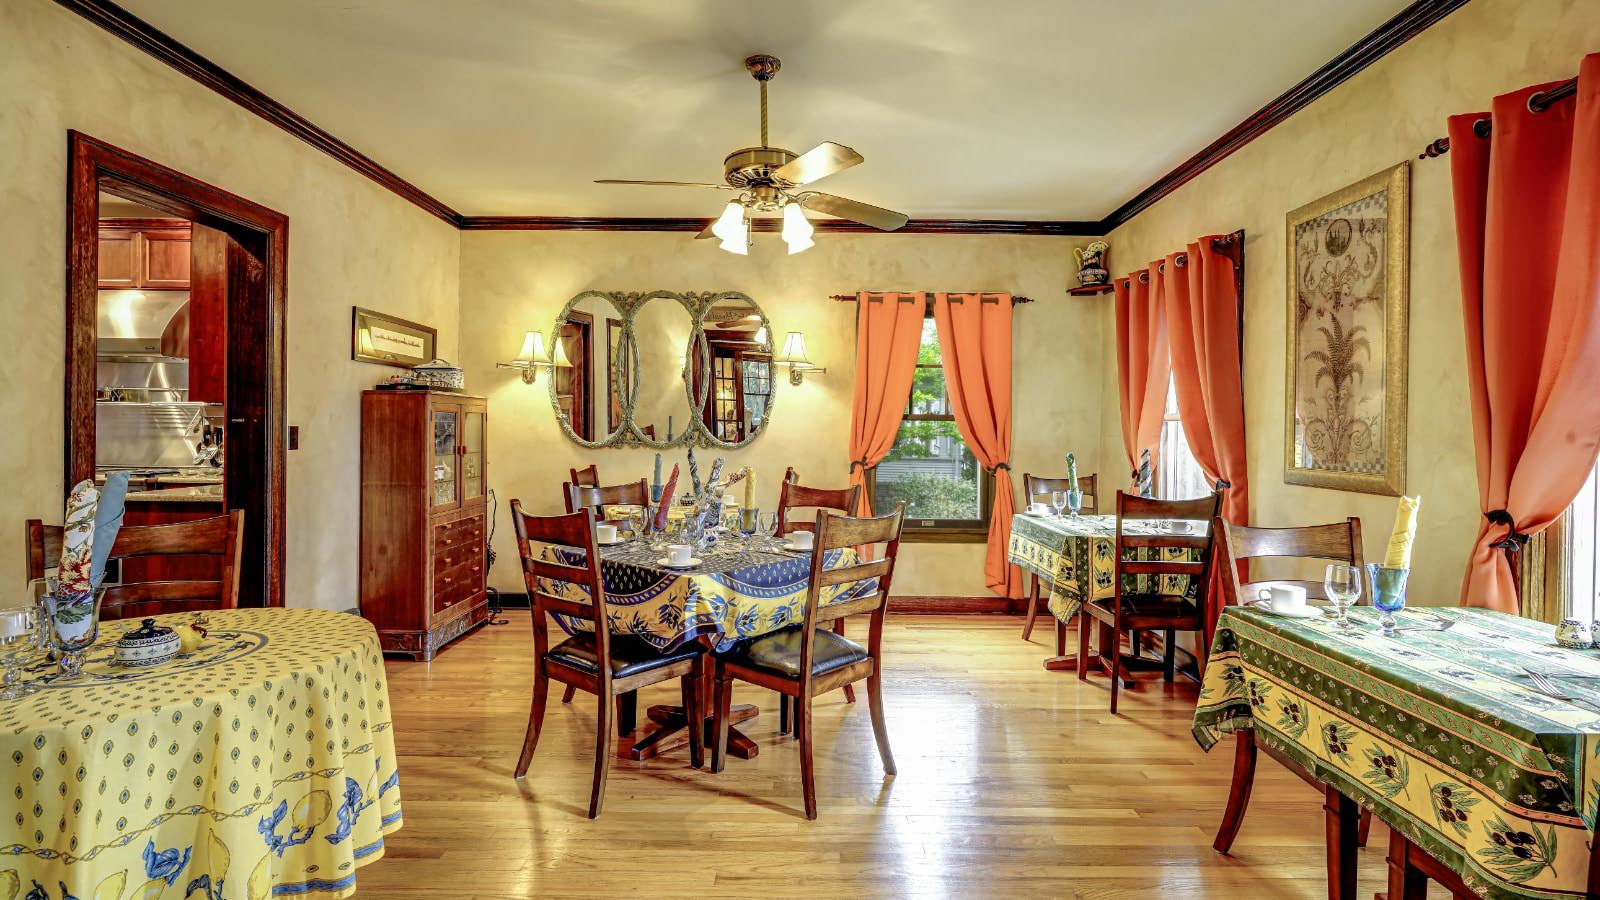 Dining room with light colored walls, hardwood flooring, multiple wooden tables with chairs, and china hutch